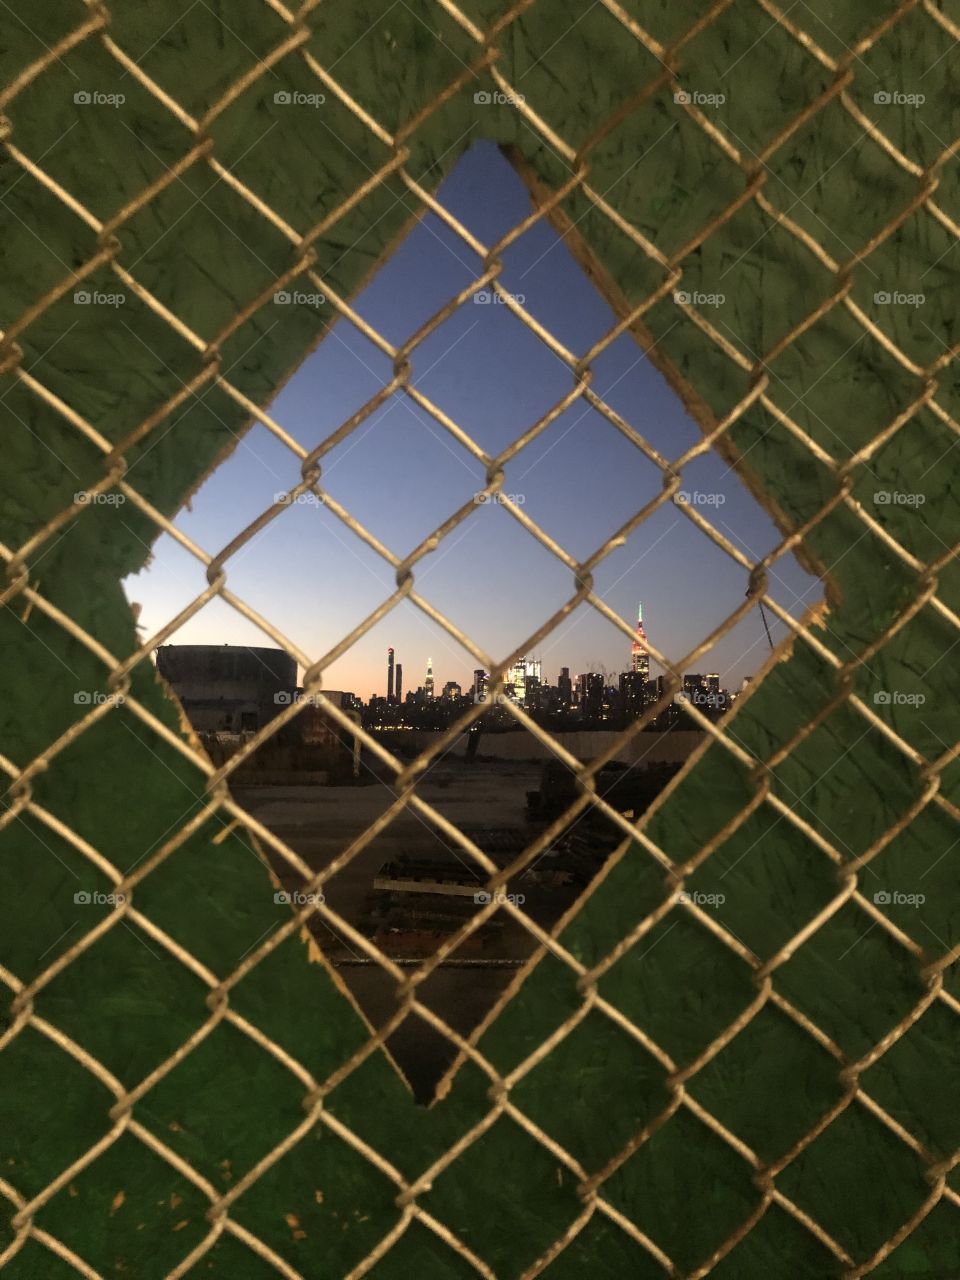 New York through a chain link fence 